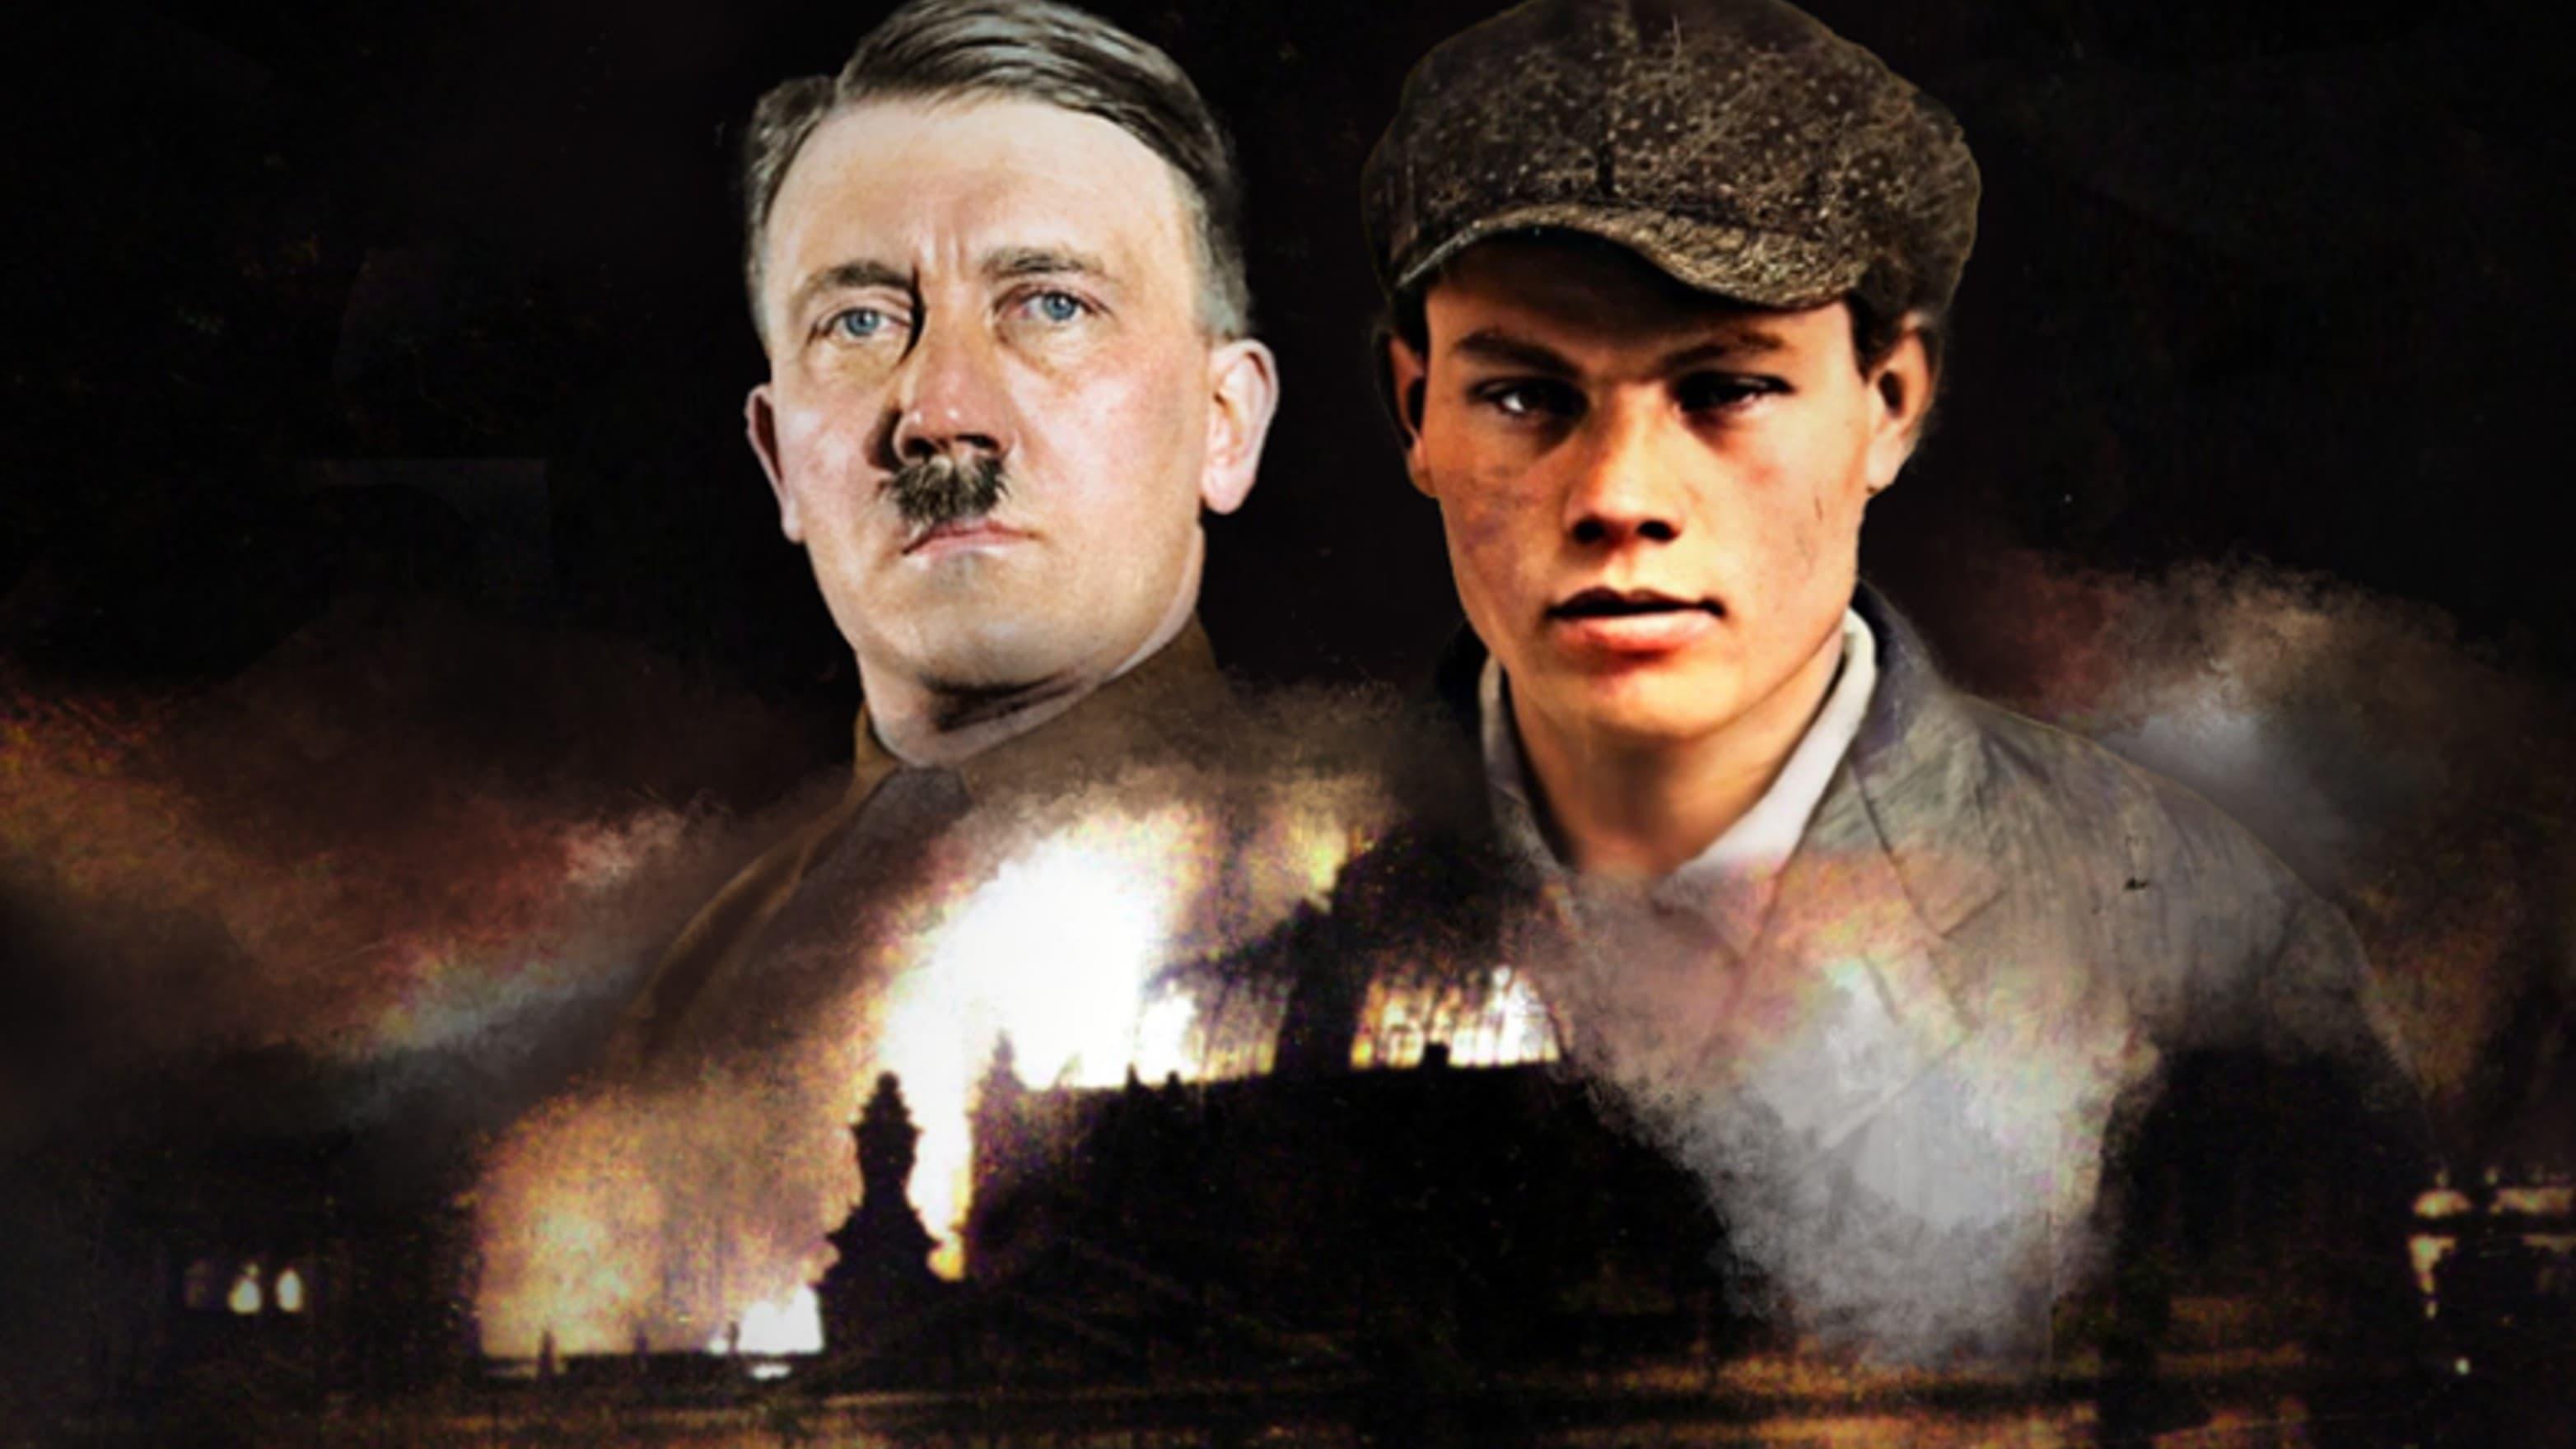 Hitler and the Reichstag Fire backdrop